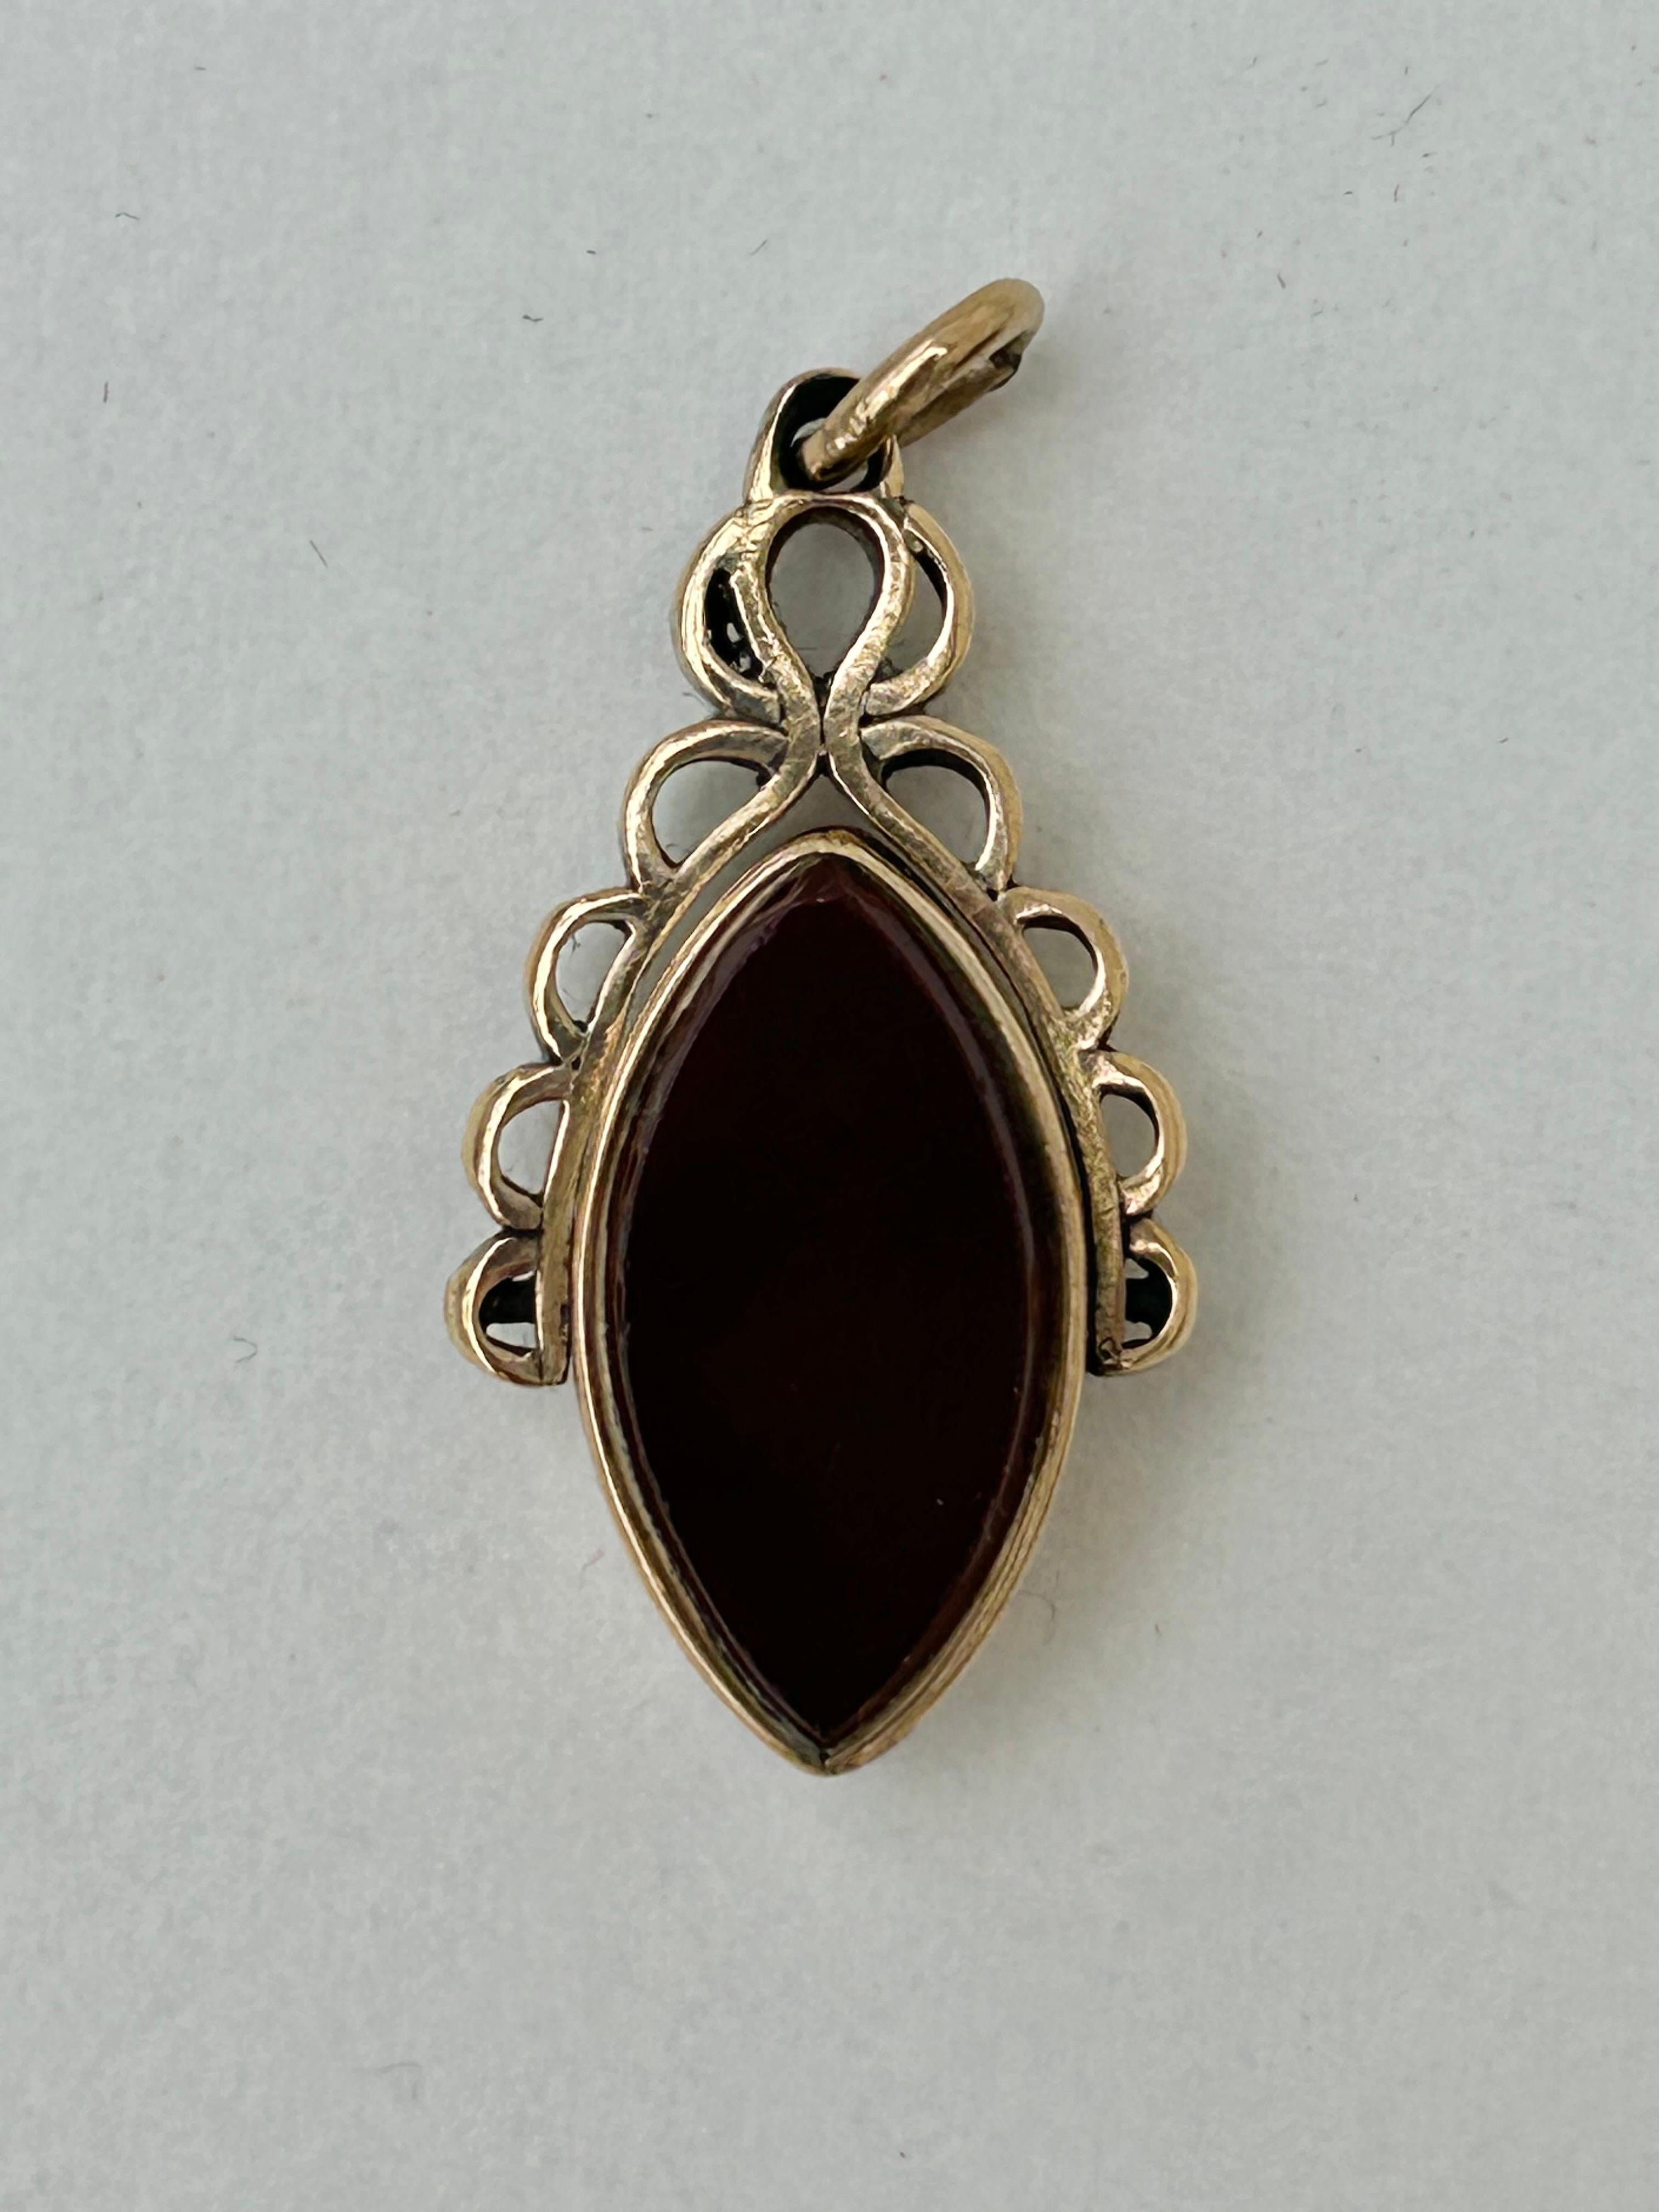 Uncut Antique Carnelian and Bloodstone 9 Carat Yellow Gold Spinning Fob Pendant For Sale